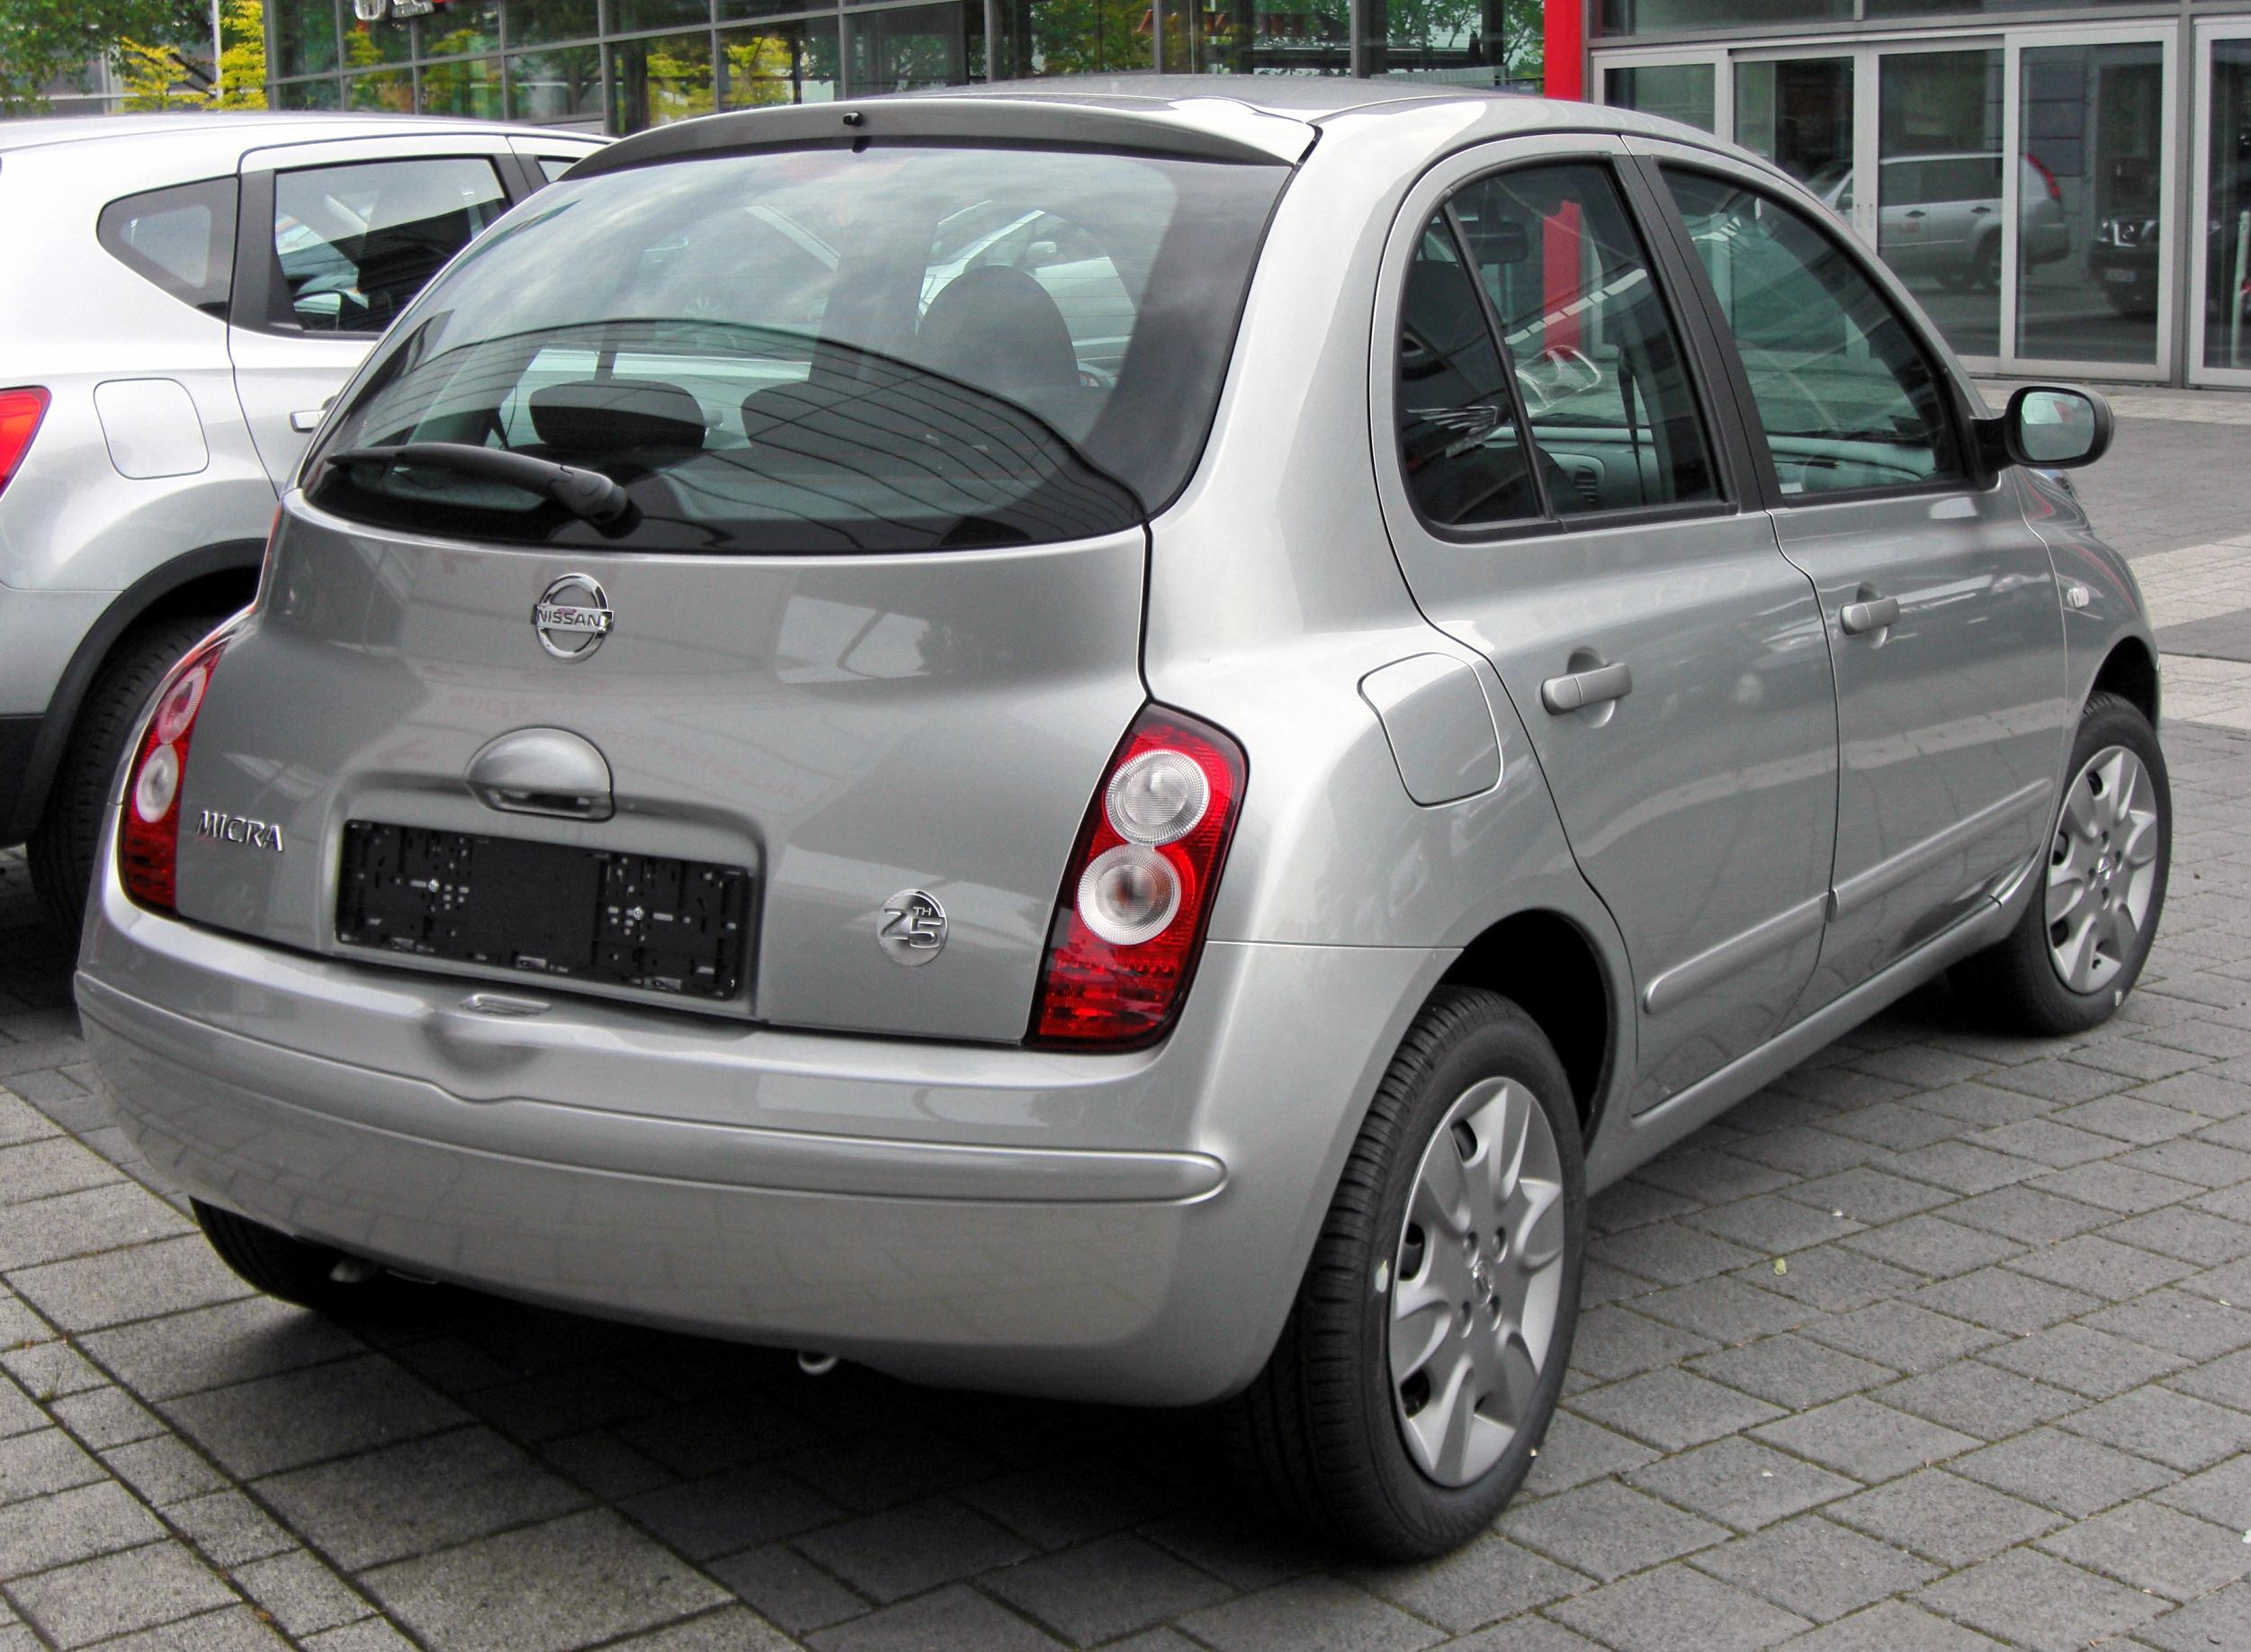 http://carsot.com/images/nissan-march-iii-k12-2002-2010-cabriolet-exterior.jpg